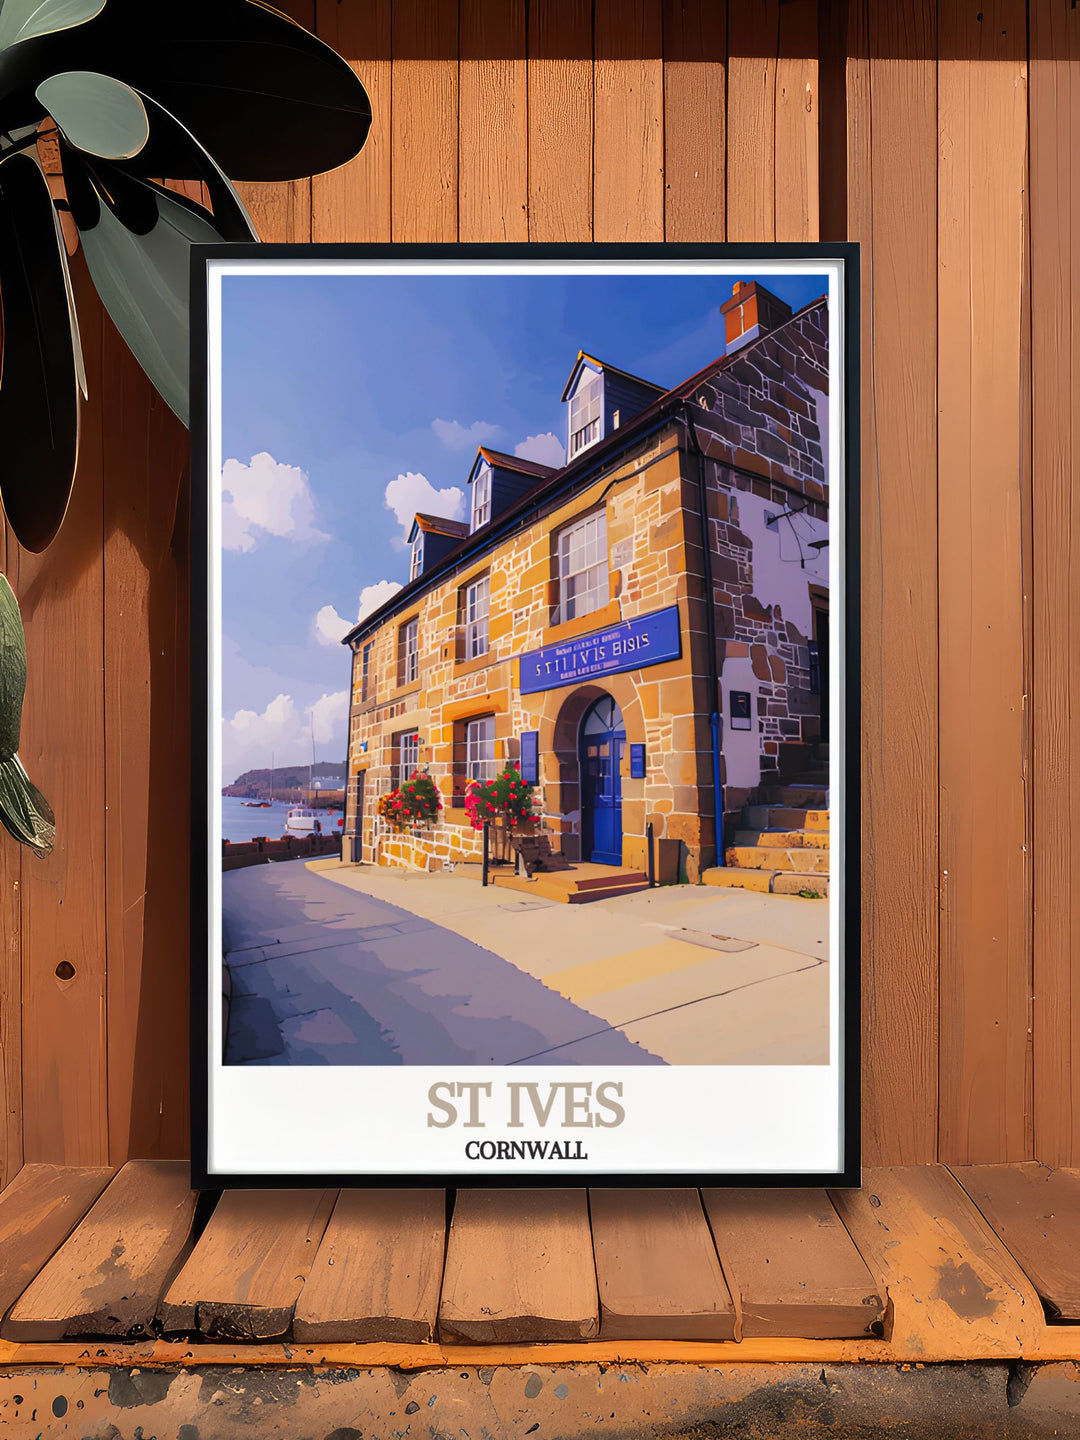 Experience the dynamic culture and scenic beauty of St Ives through this detailed poster, highlighting the museum and its role in preserving the towns legacy.